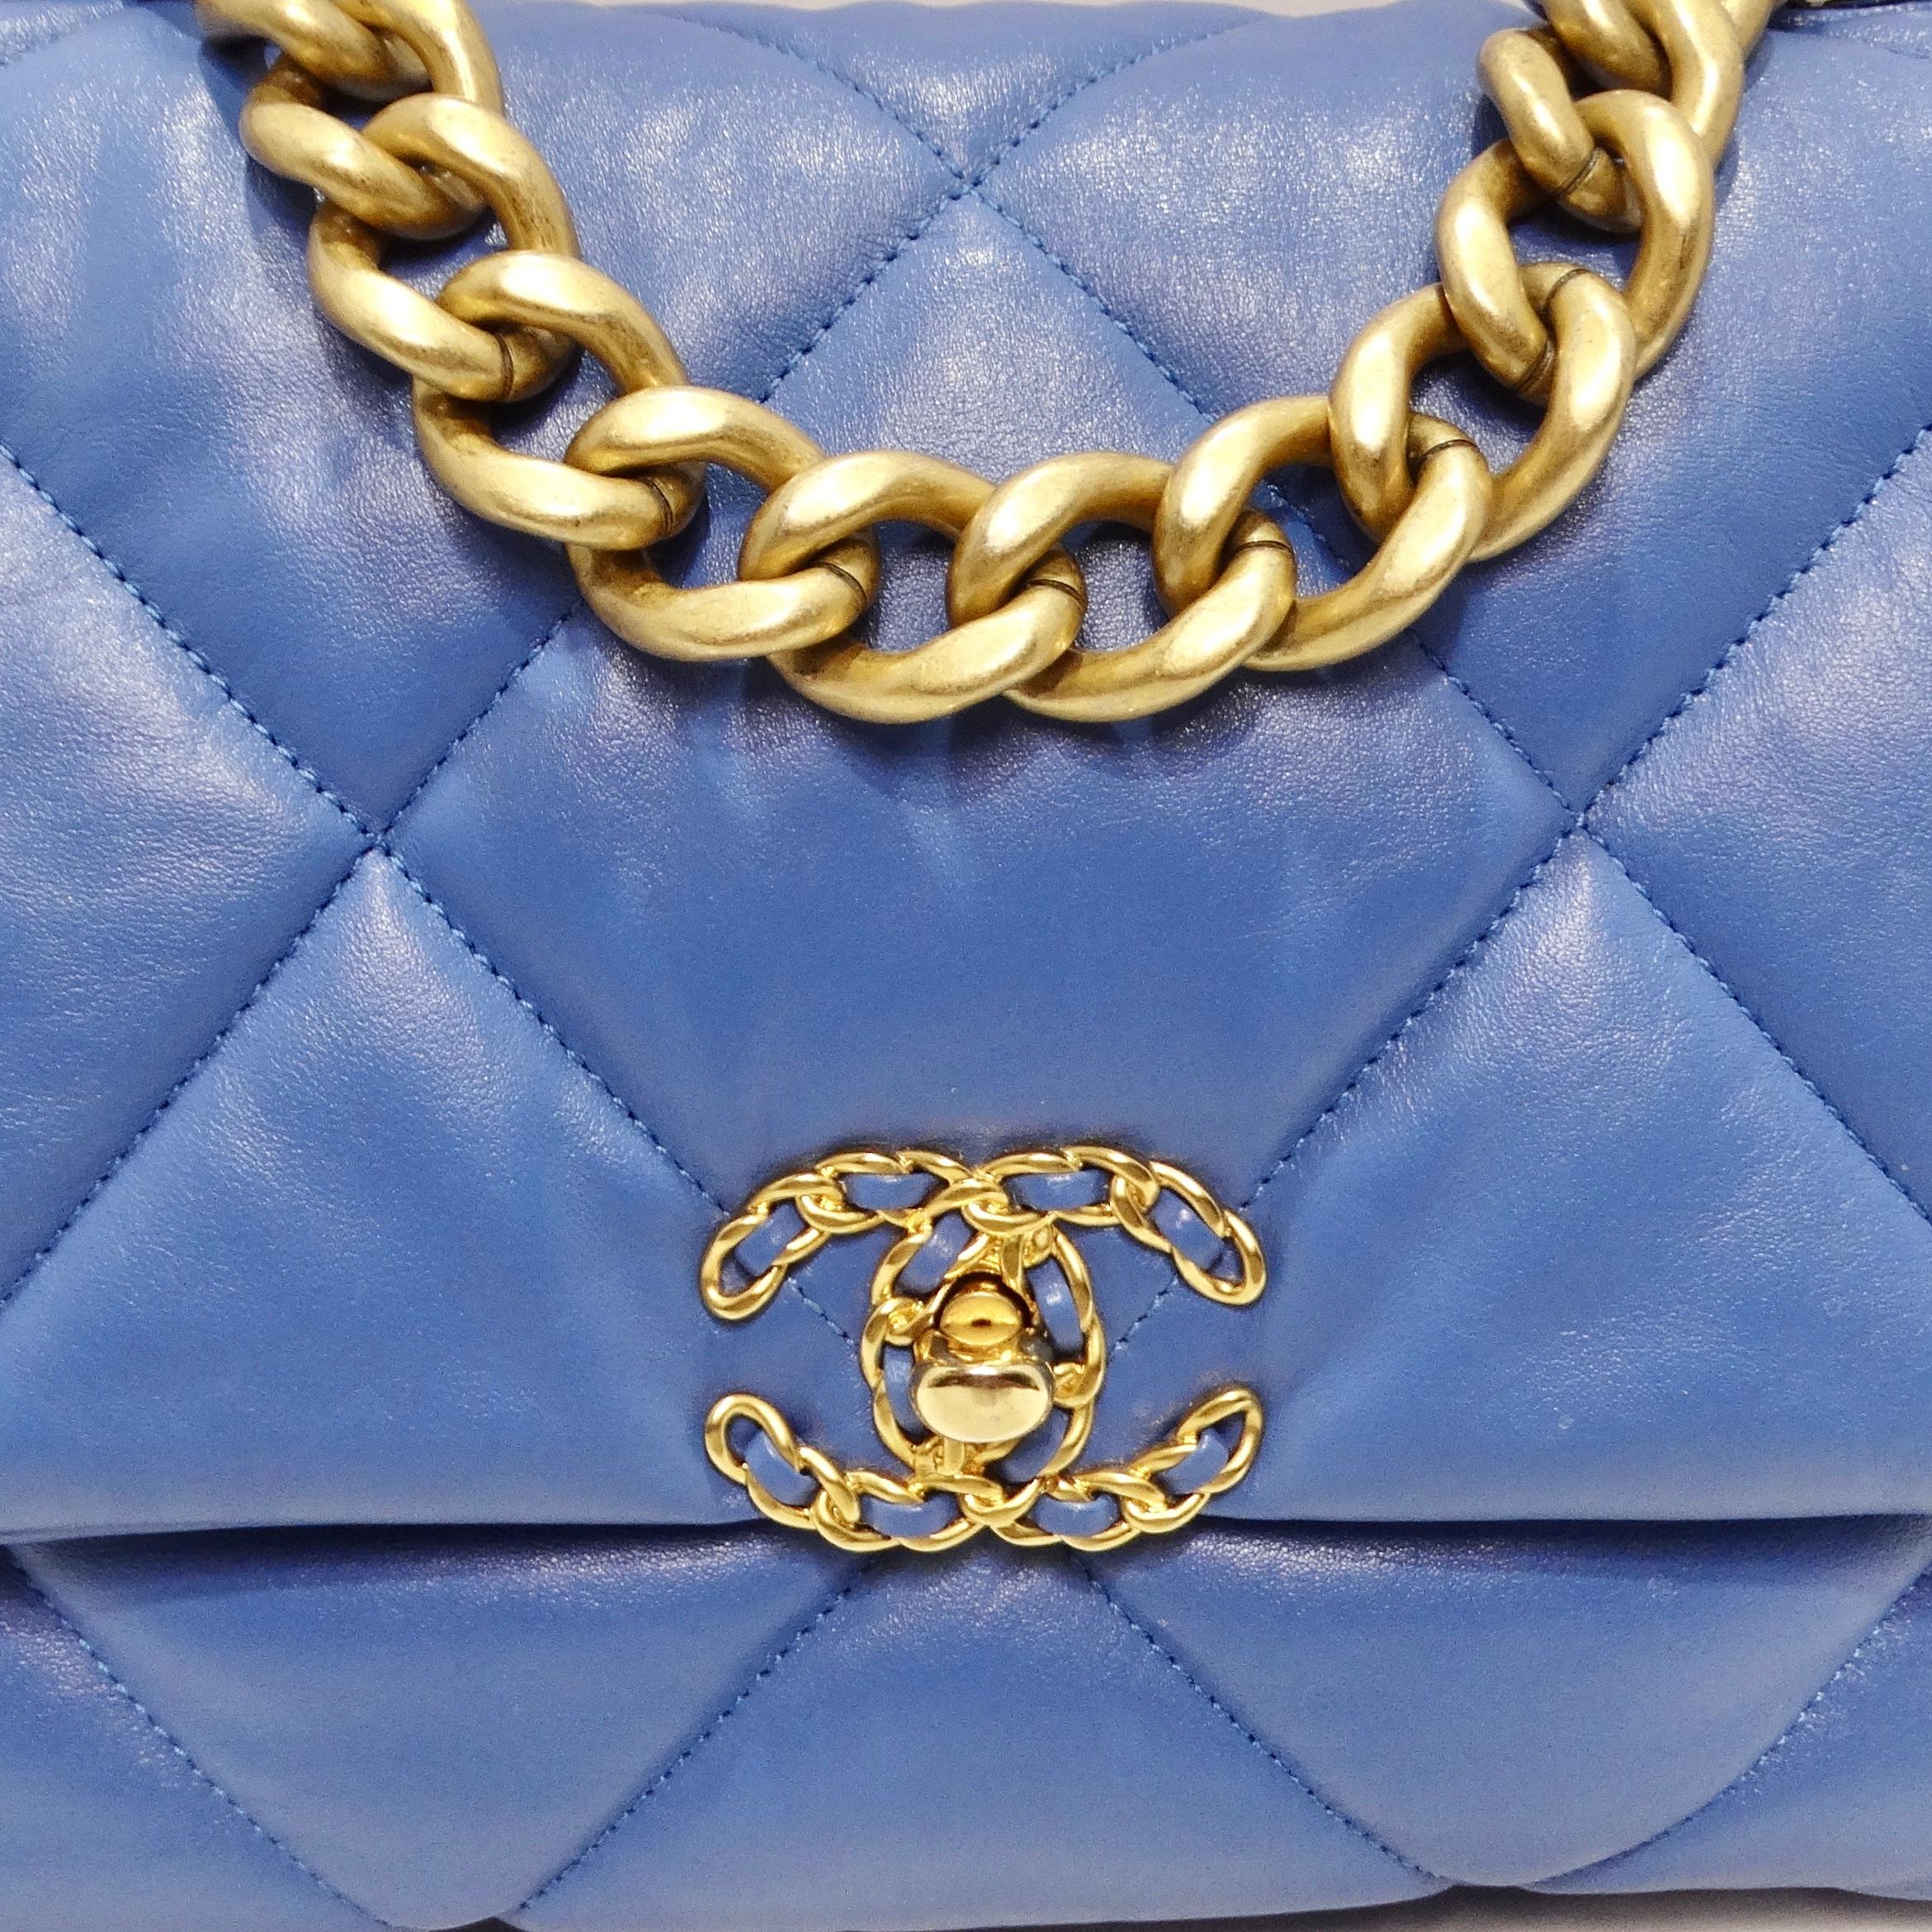 Elevate your style with the Chanel Lambskin Quilted Medium 19 Flap Bag in Blue, an authentic masterpiece that seamlessly combines Chanel's signature quilted lambskin leather with stylish gold and ruthenium hardware. This bag is an authentic Chanel